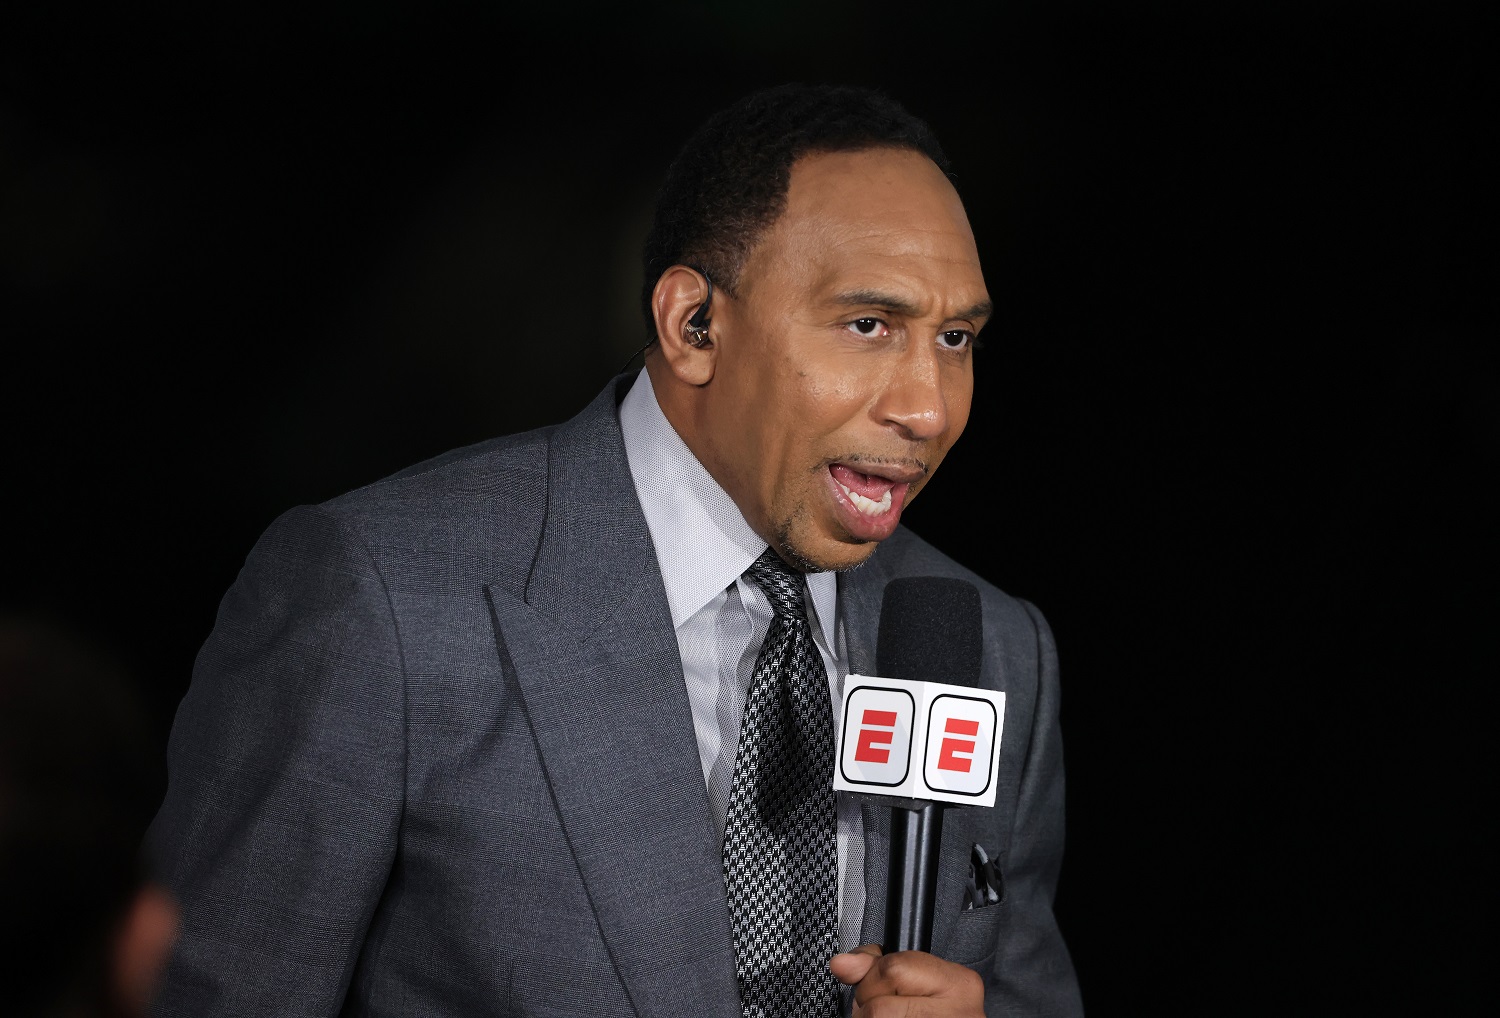 ESPN analyst Stephen A. Smith during Game 3 of the NBA Finals between the Milwaukee Bucks and the Phoenix Suns on July 11, 2021. in Milwaukee. | Justin Casterline/Getty Images